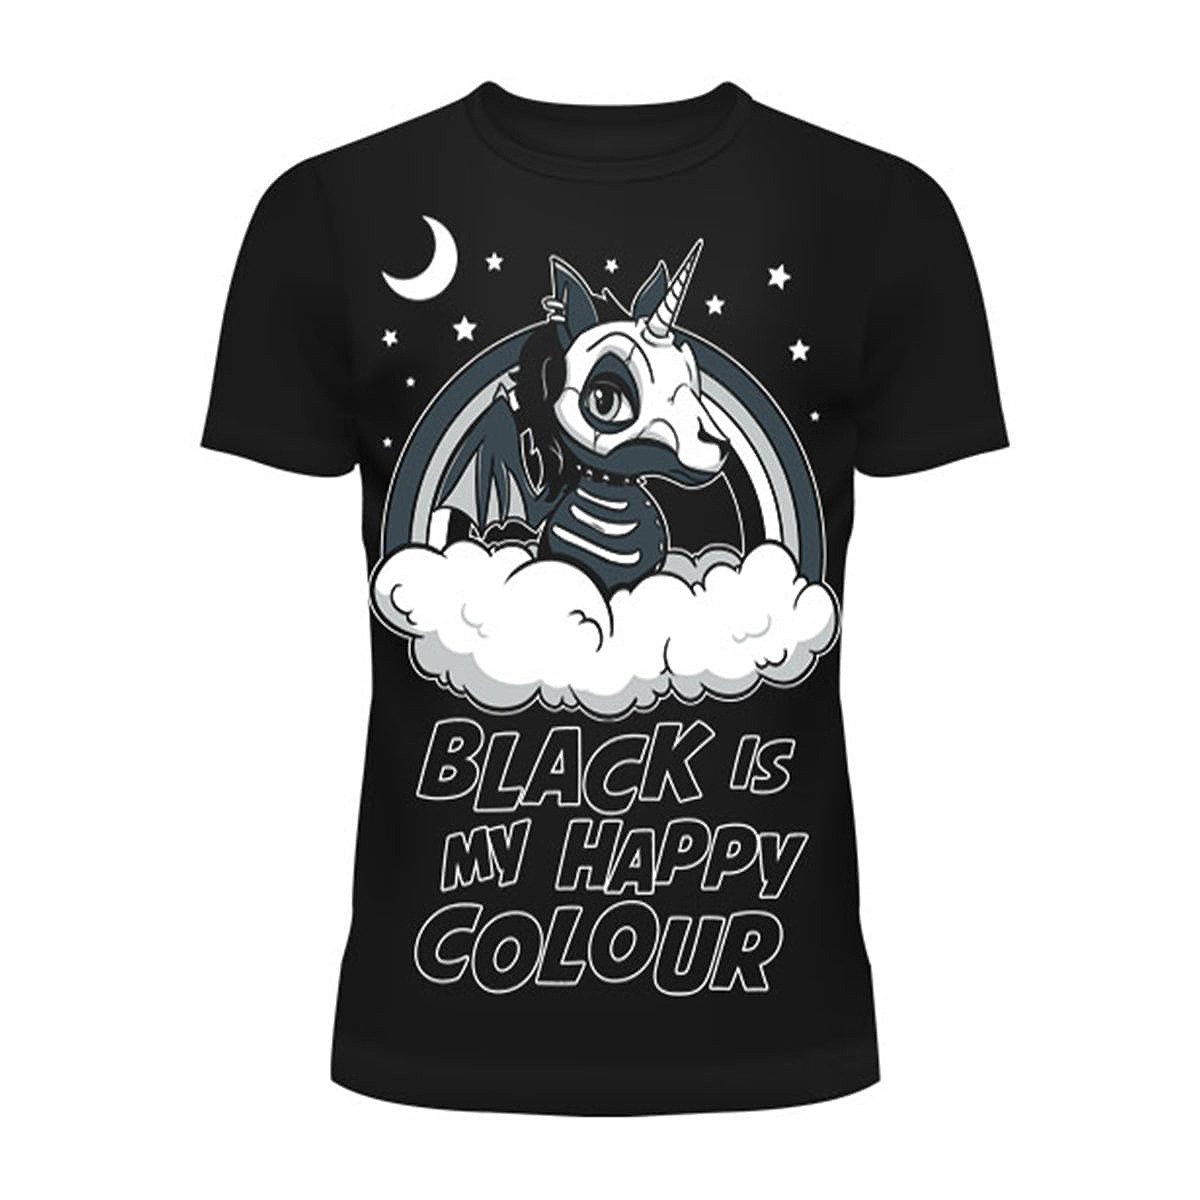 Cupcake Cult T-Shirt Black Is My Happy Colour